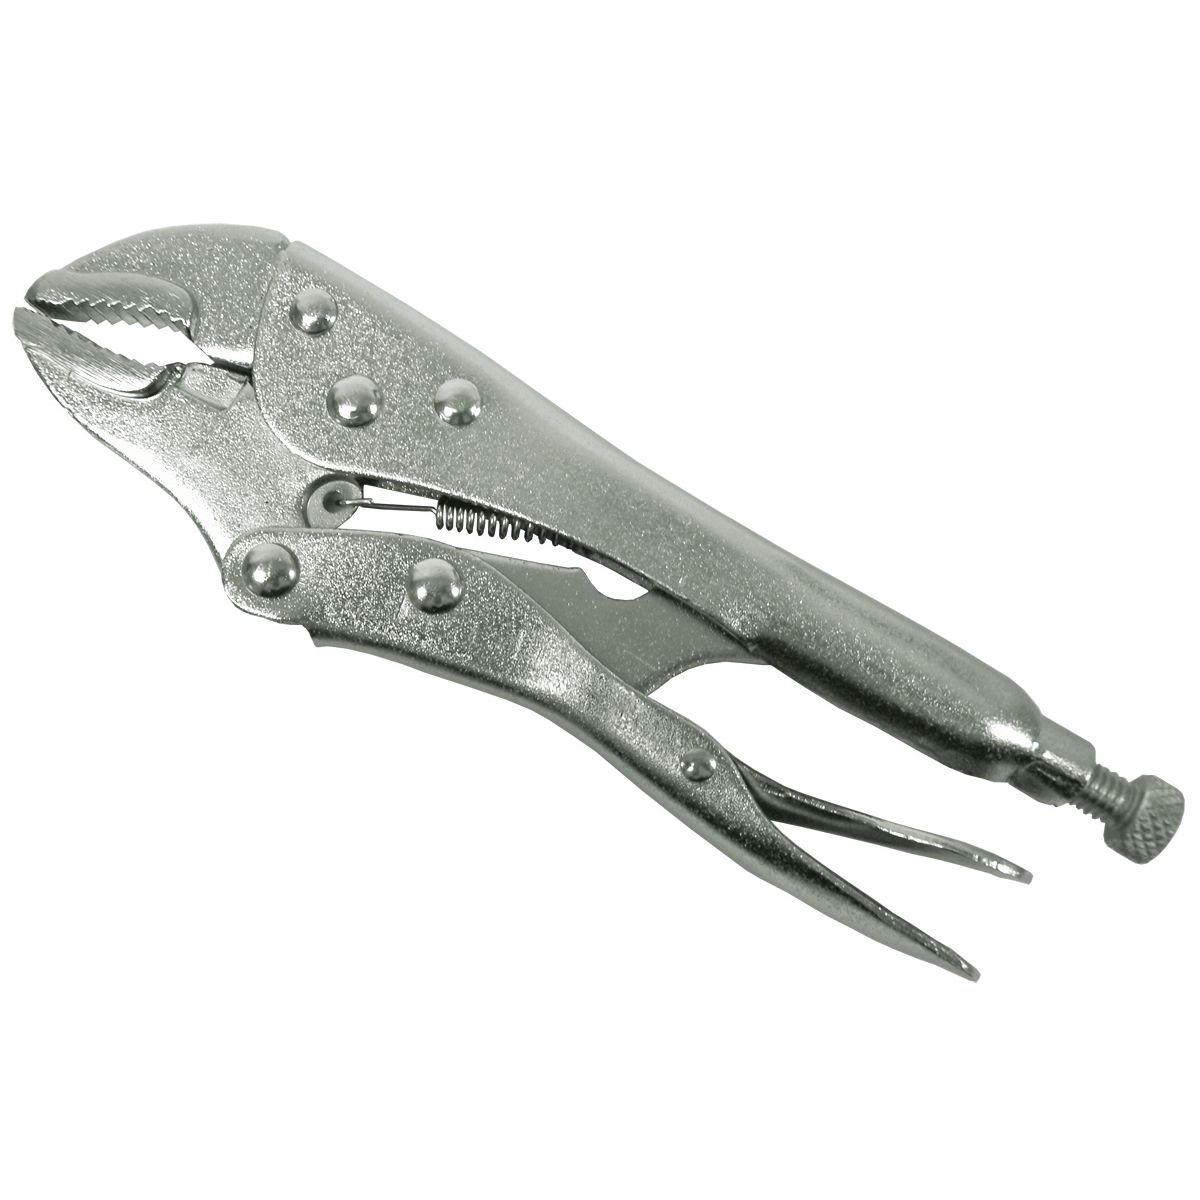 Curved Jaw Locking Plier - 7 In